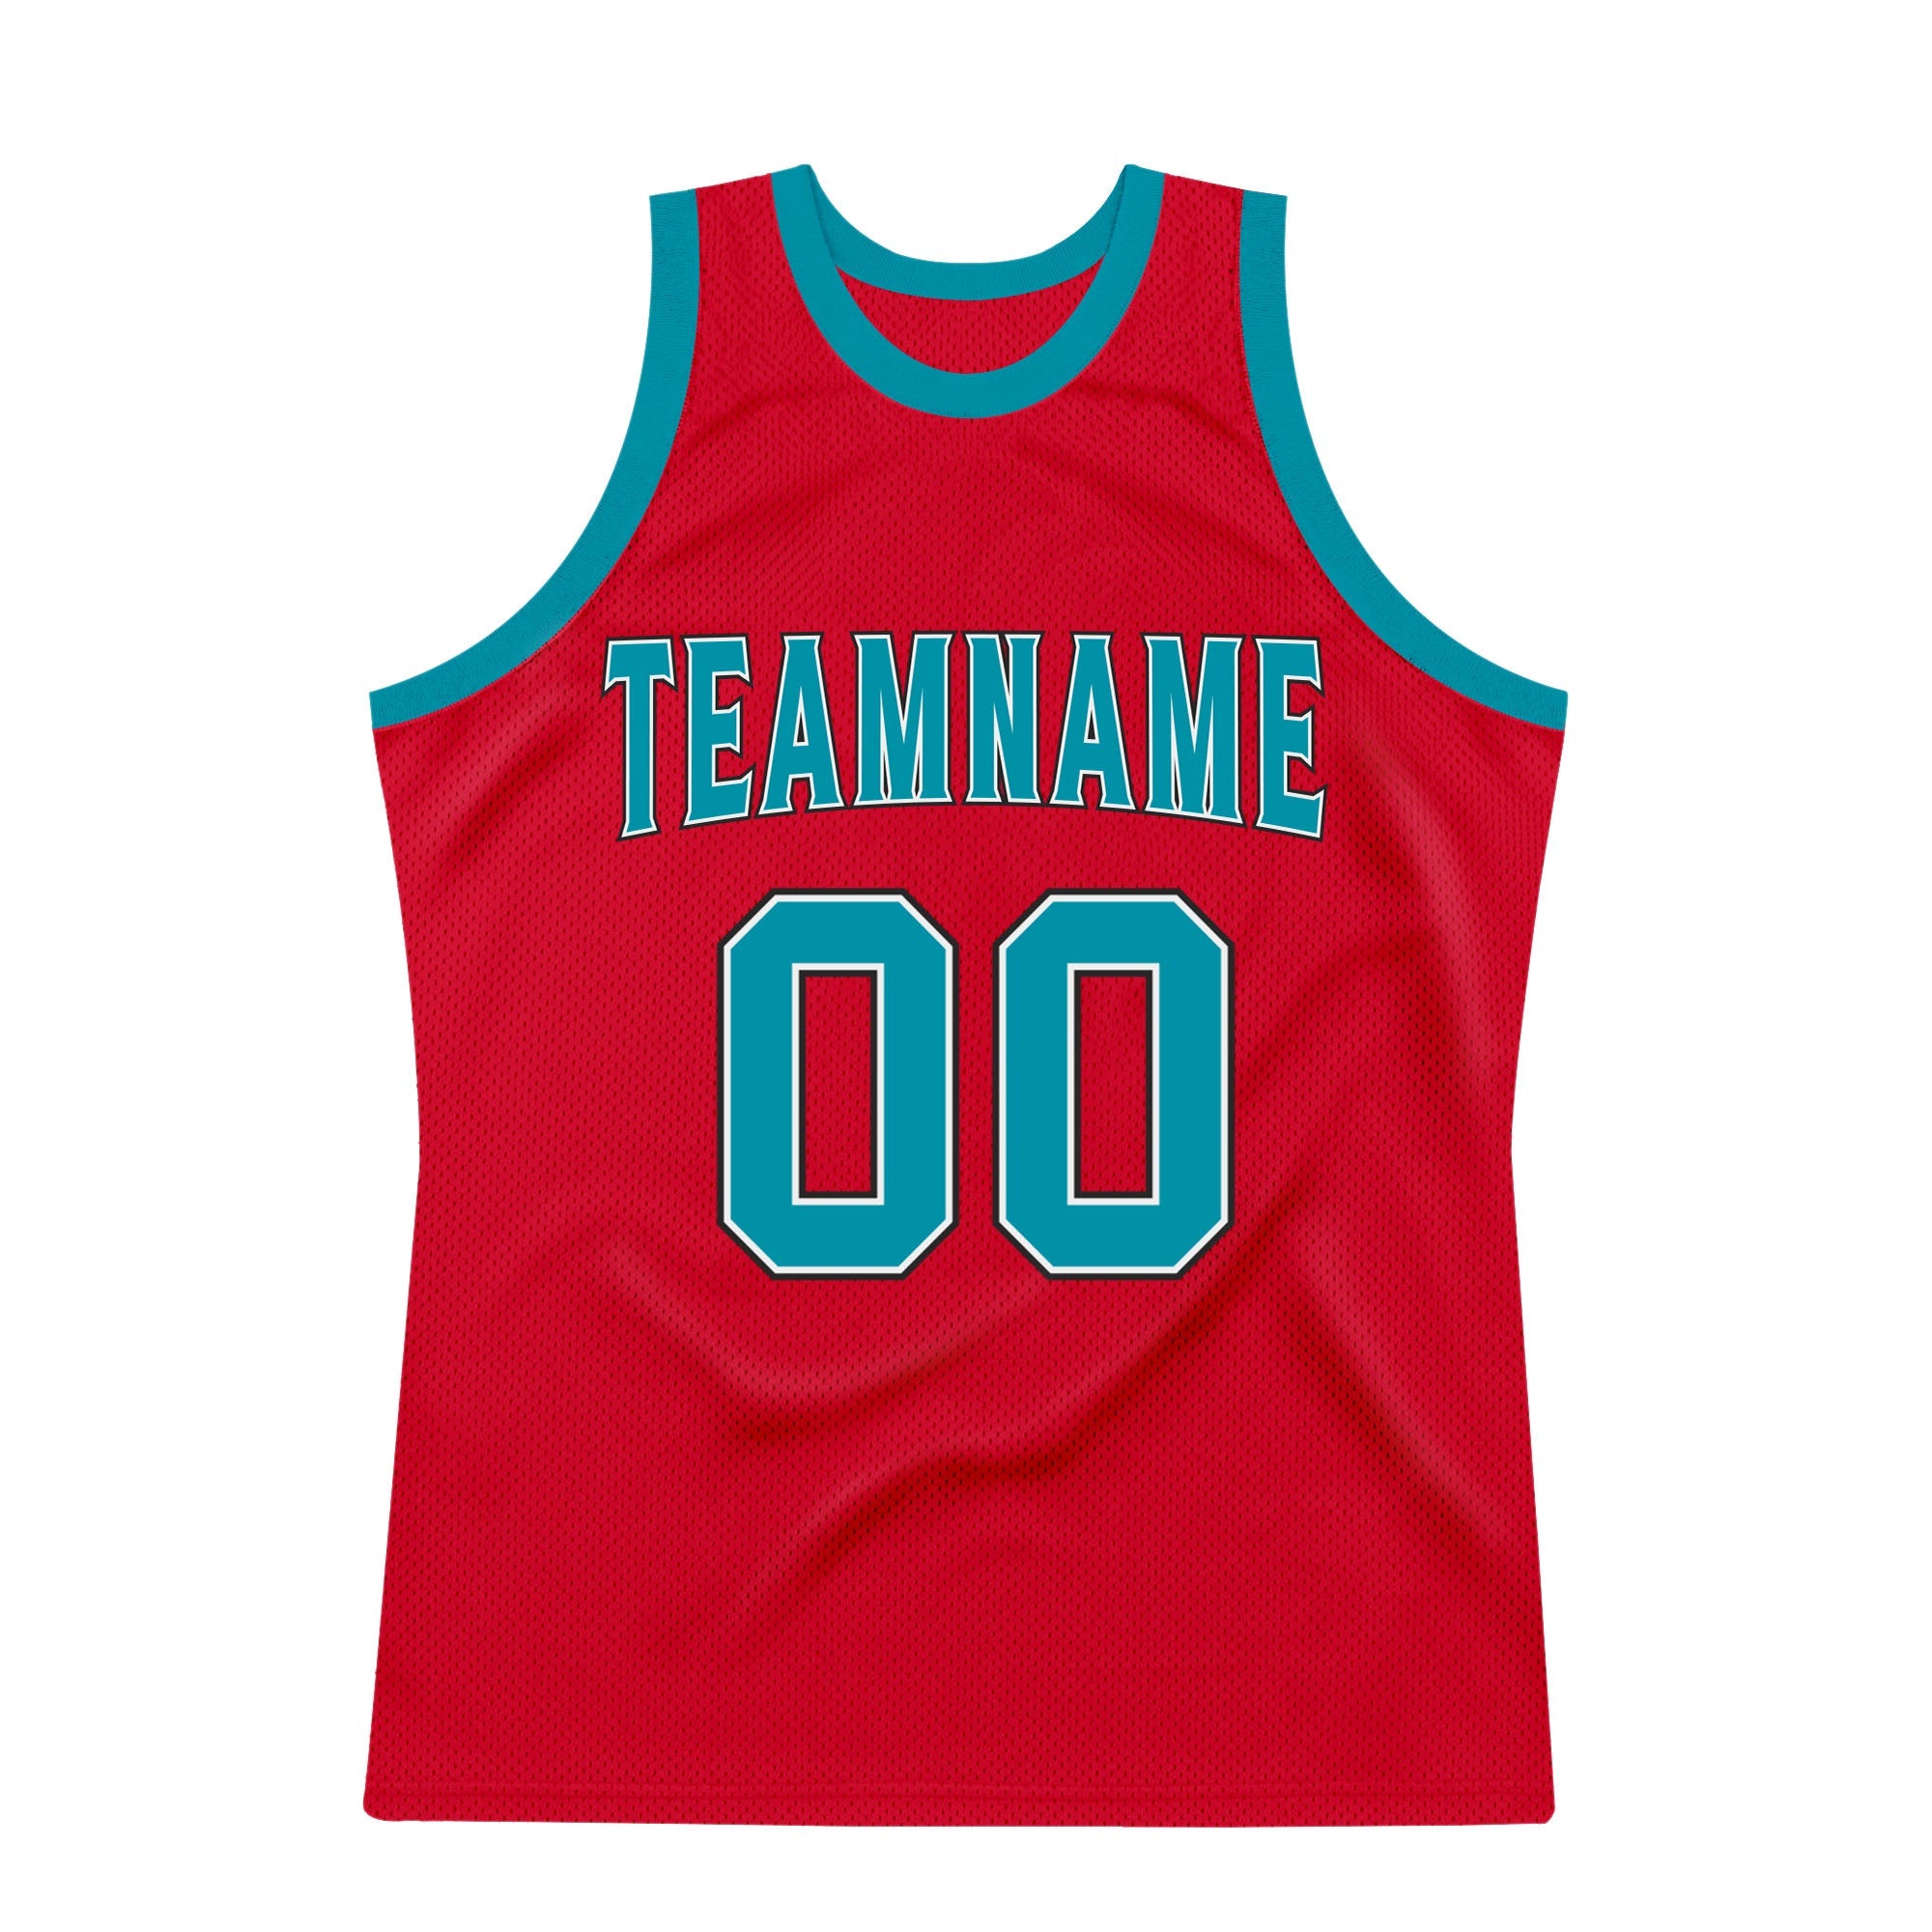 Custom Red Teal-Black Authentic Throwback Basketball Jersey